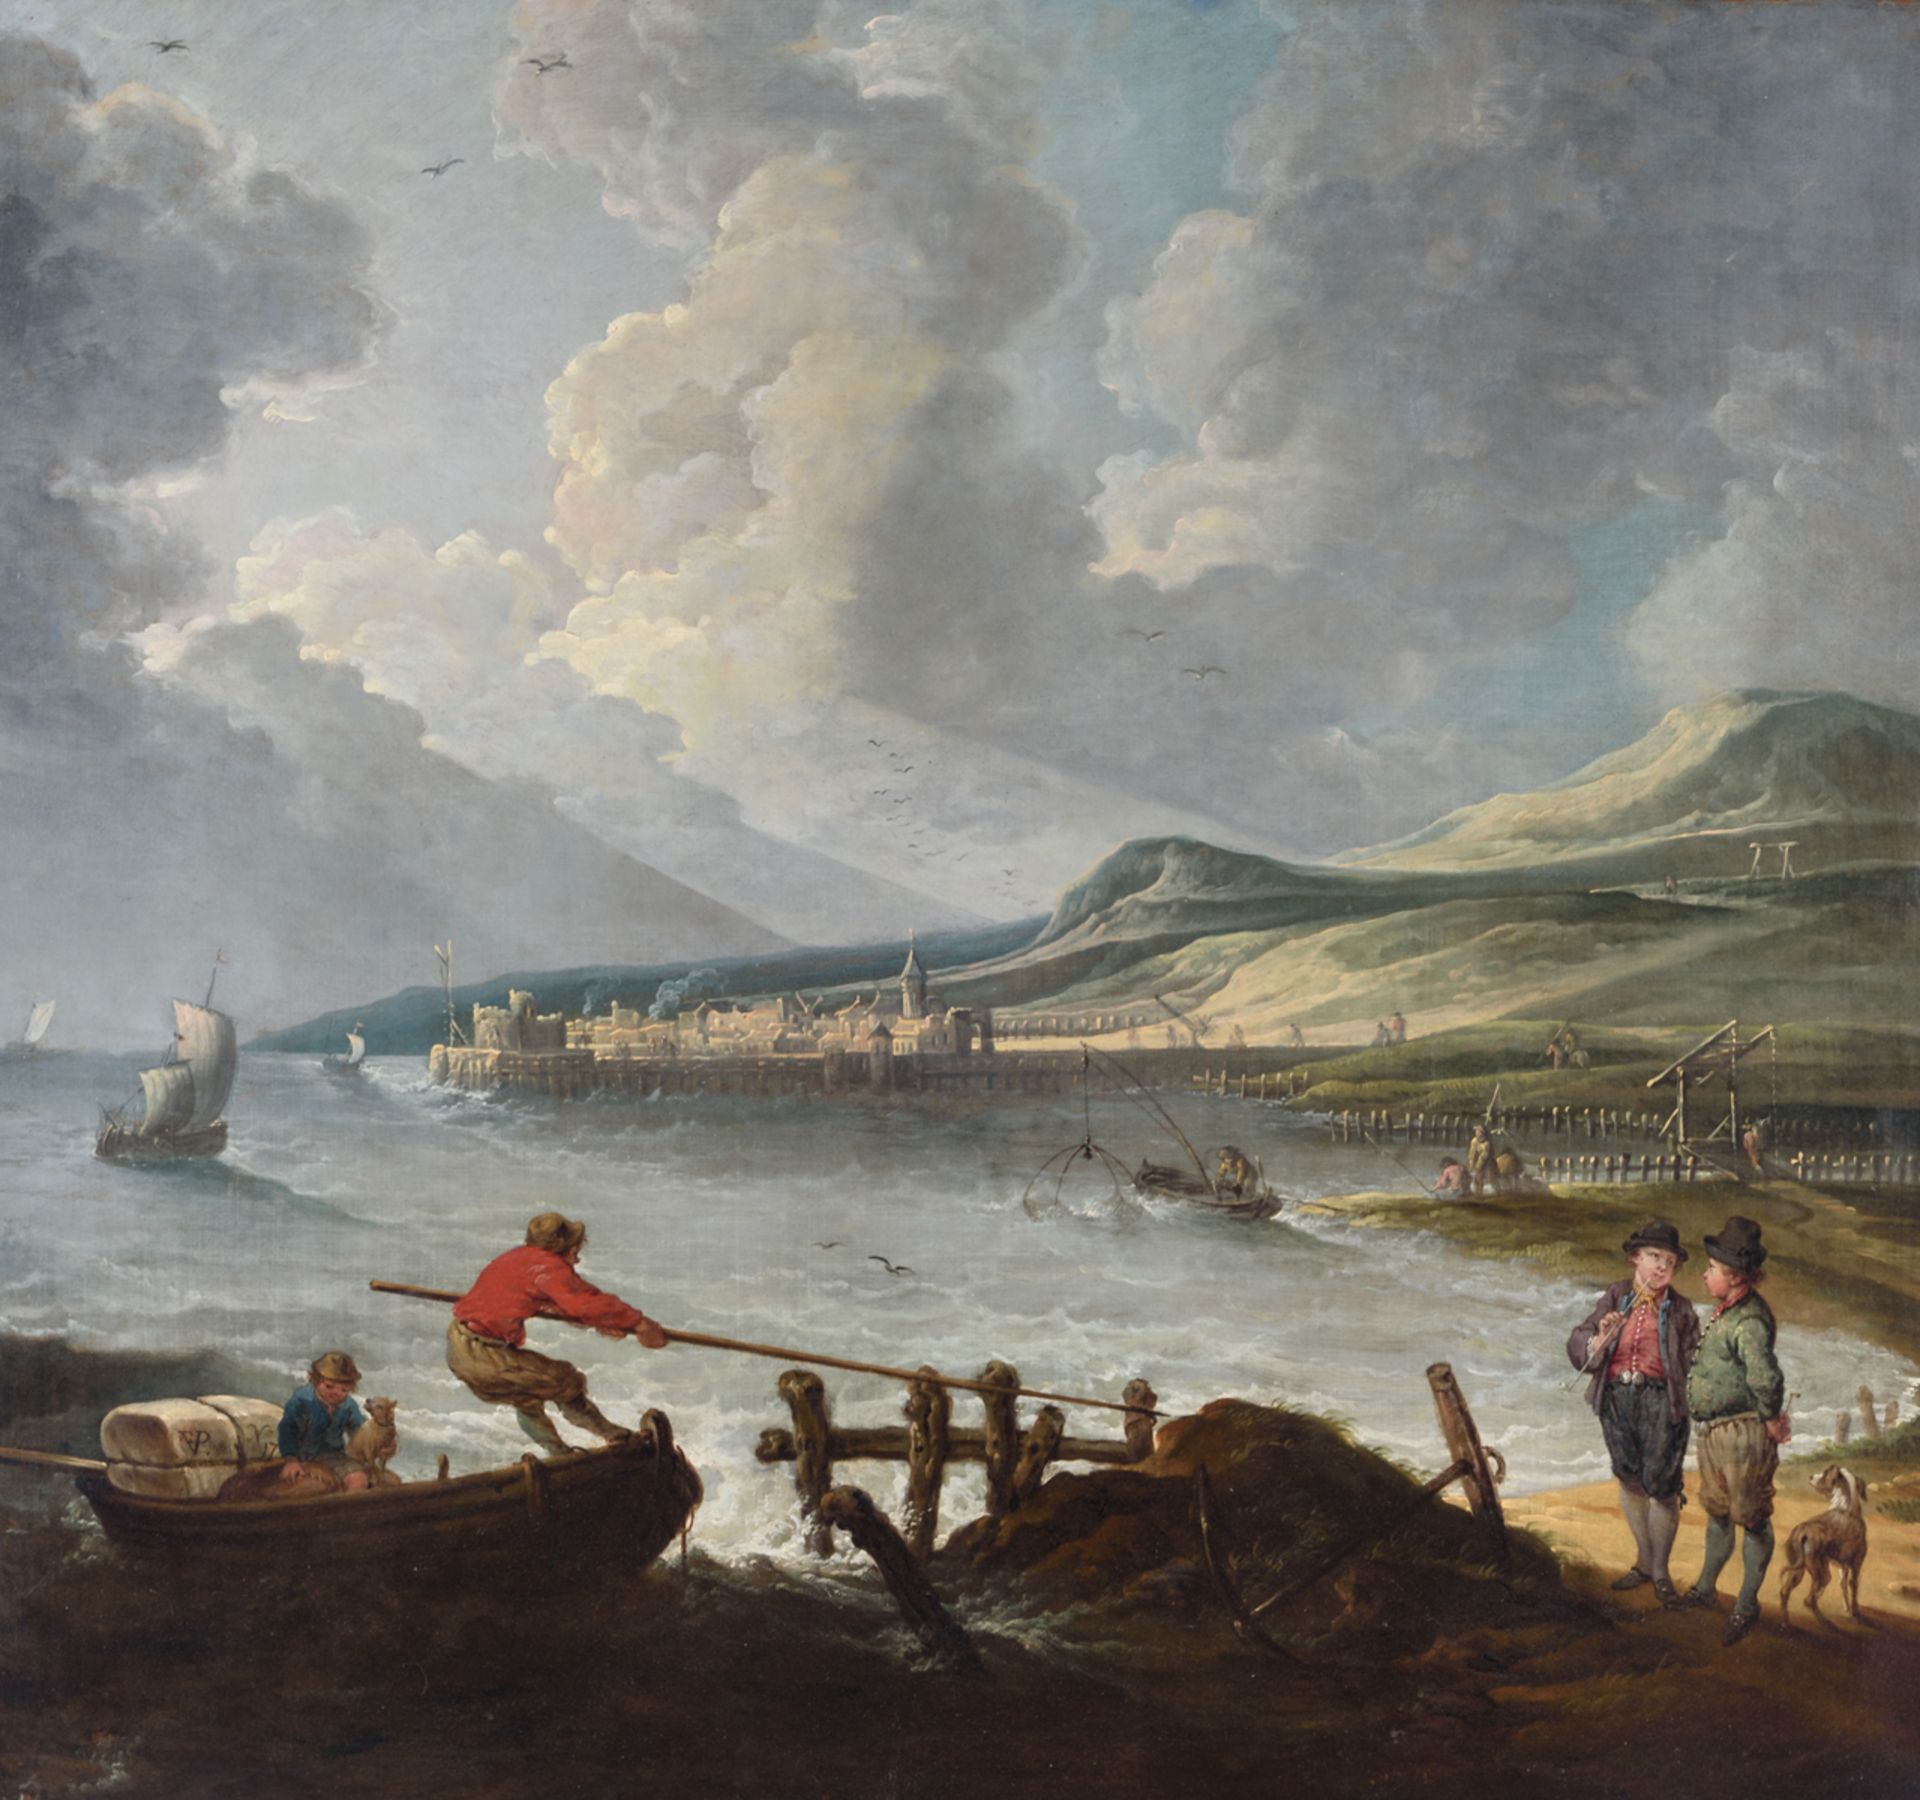 Monogrammed F.V.P. (attr. to Garemijn and inspired by Cl. J. Vernet), a Mediterranean harbour scene,